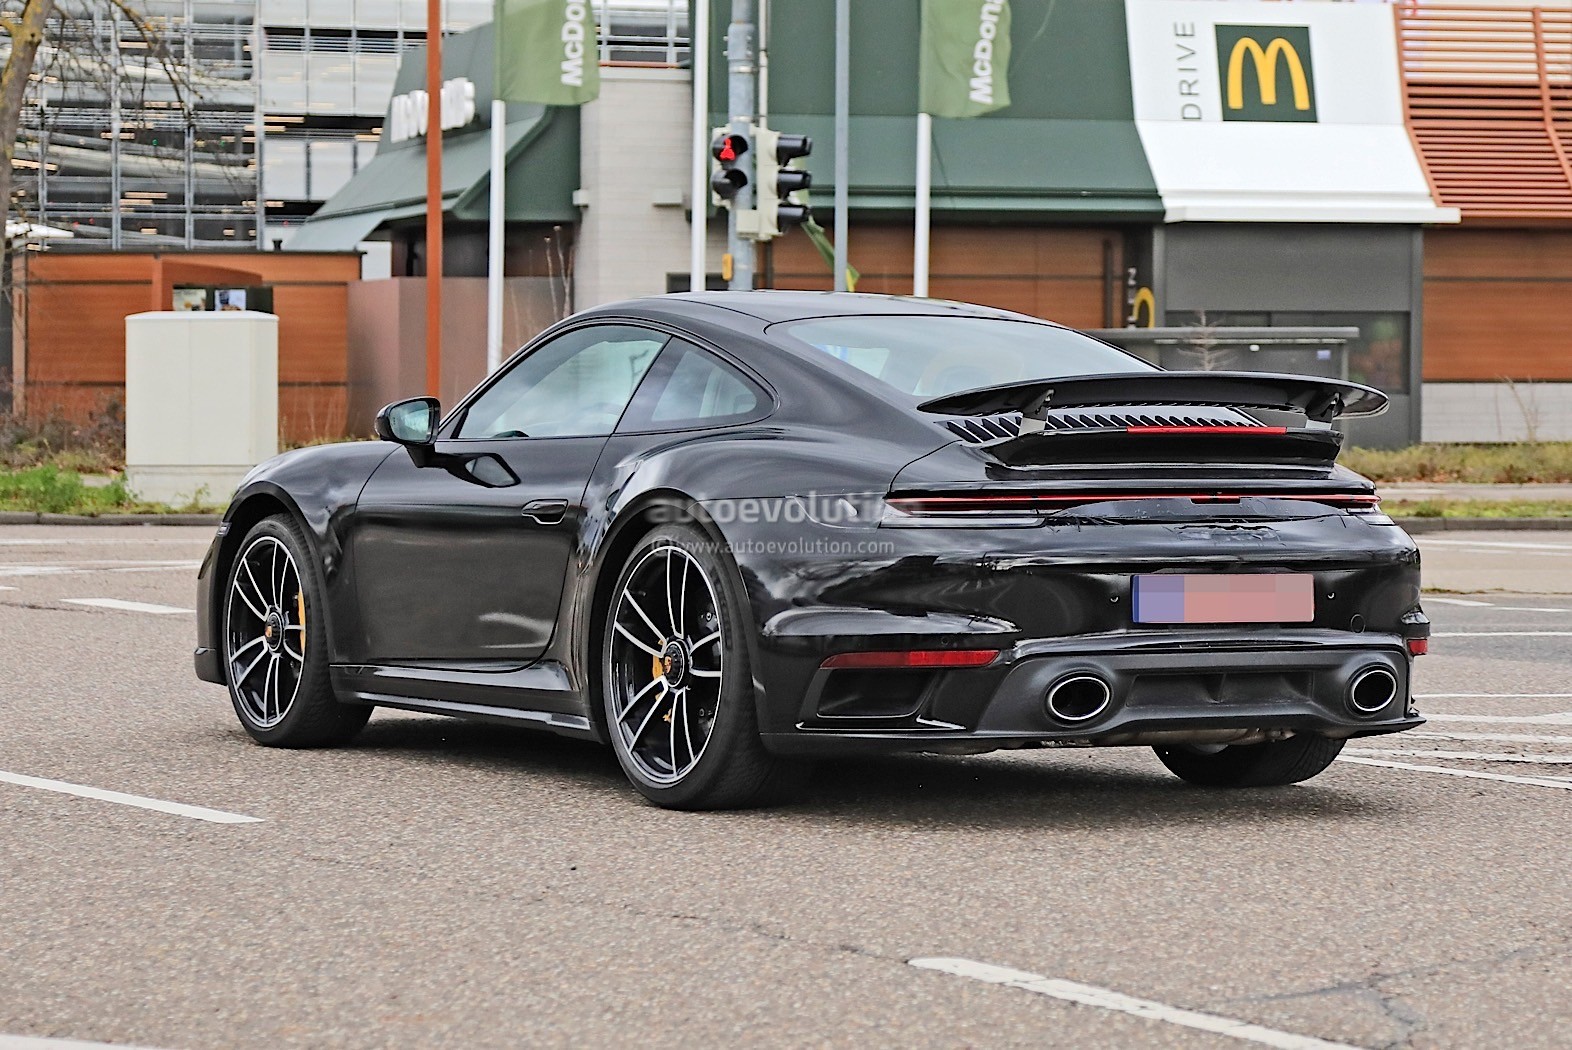 2021 Porsche 911 Turbo S 992 Spied Almost Naked Ahead of 